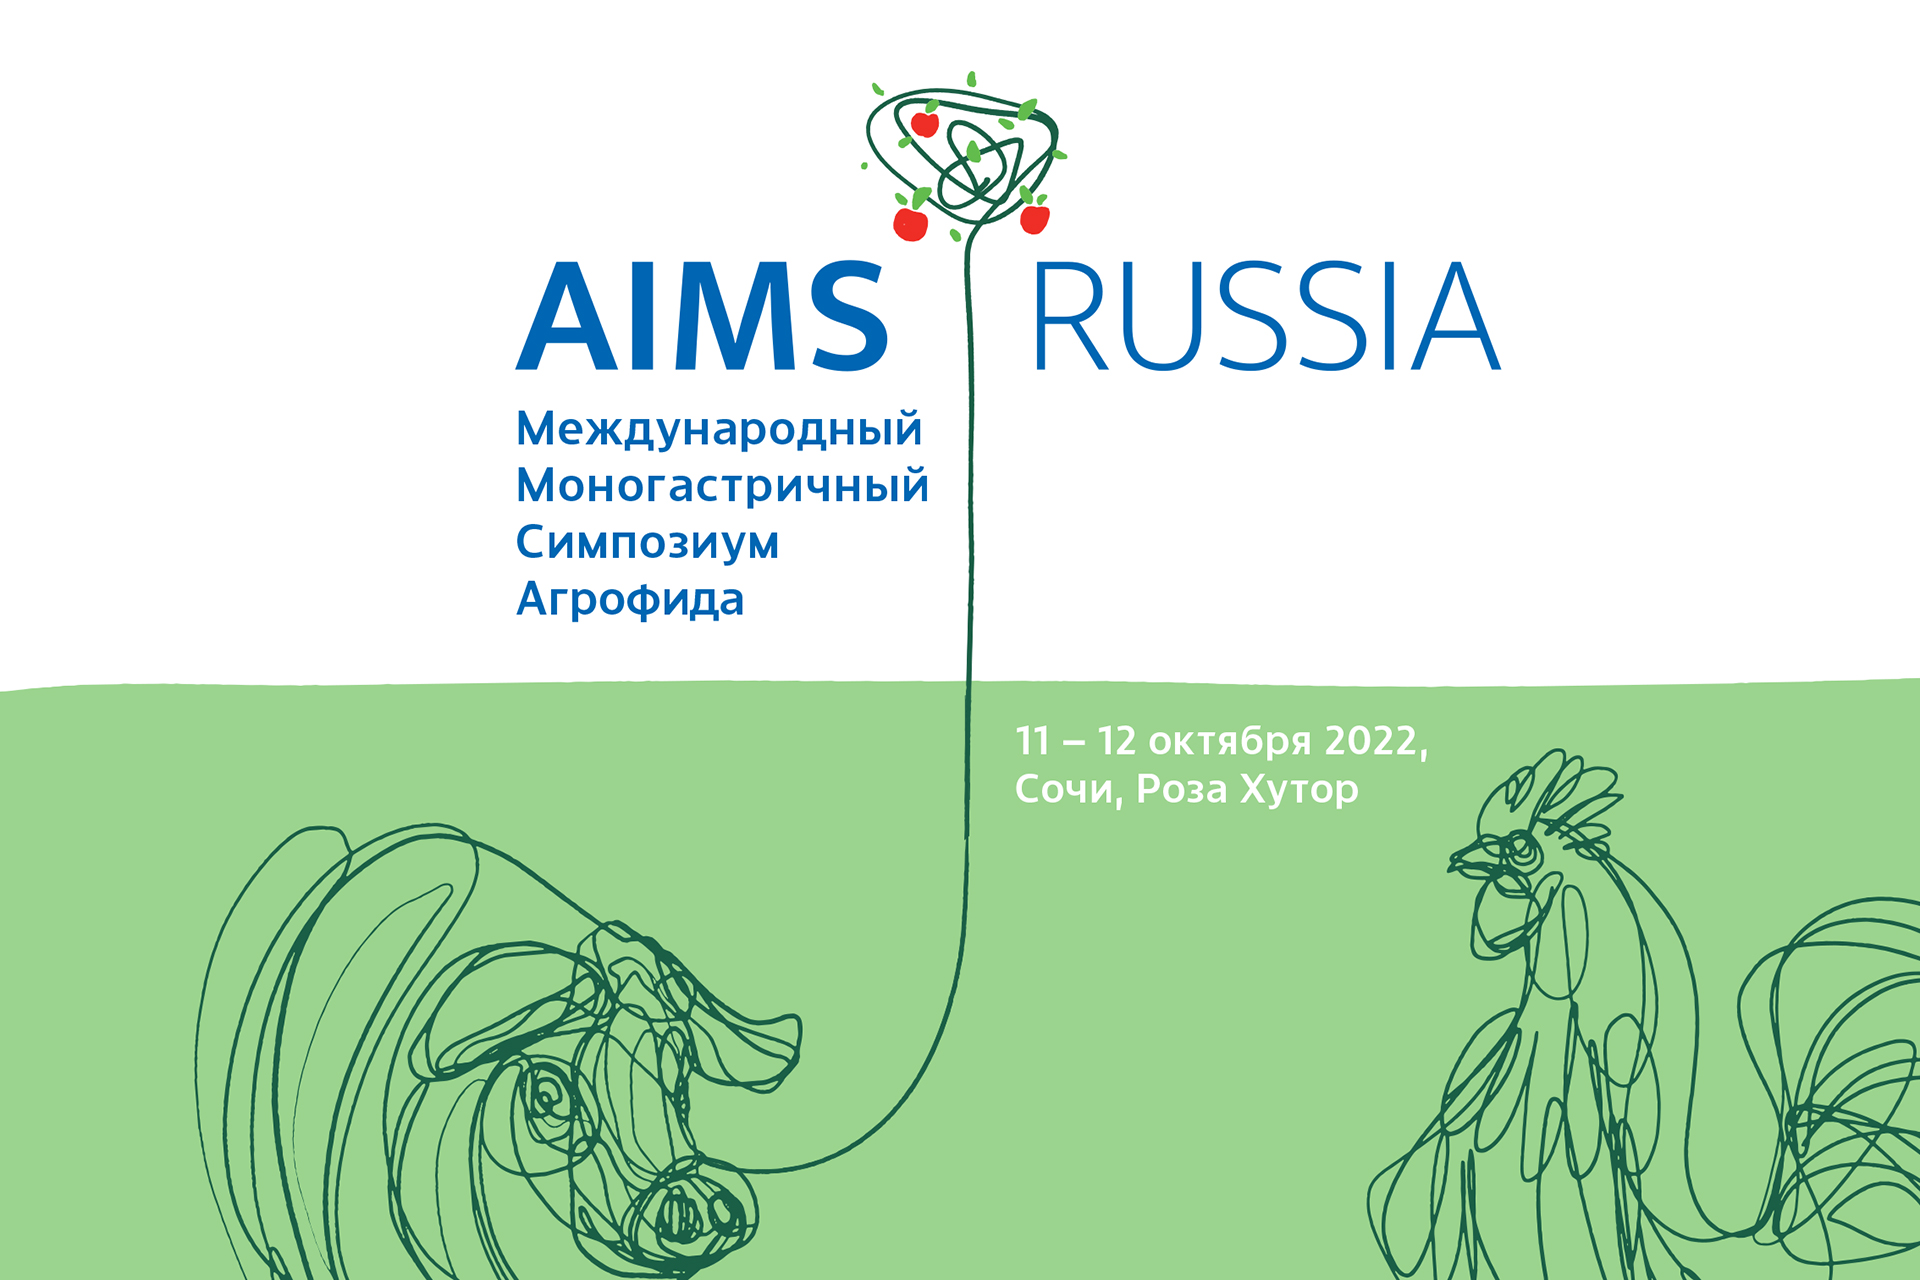 AIMS RUSSIA 2002